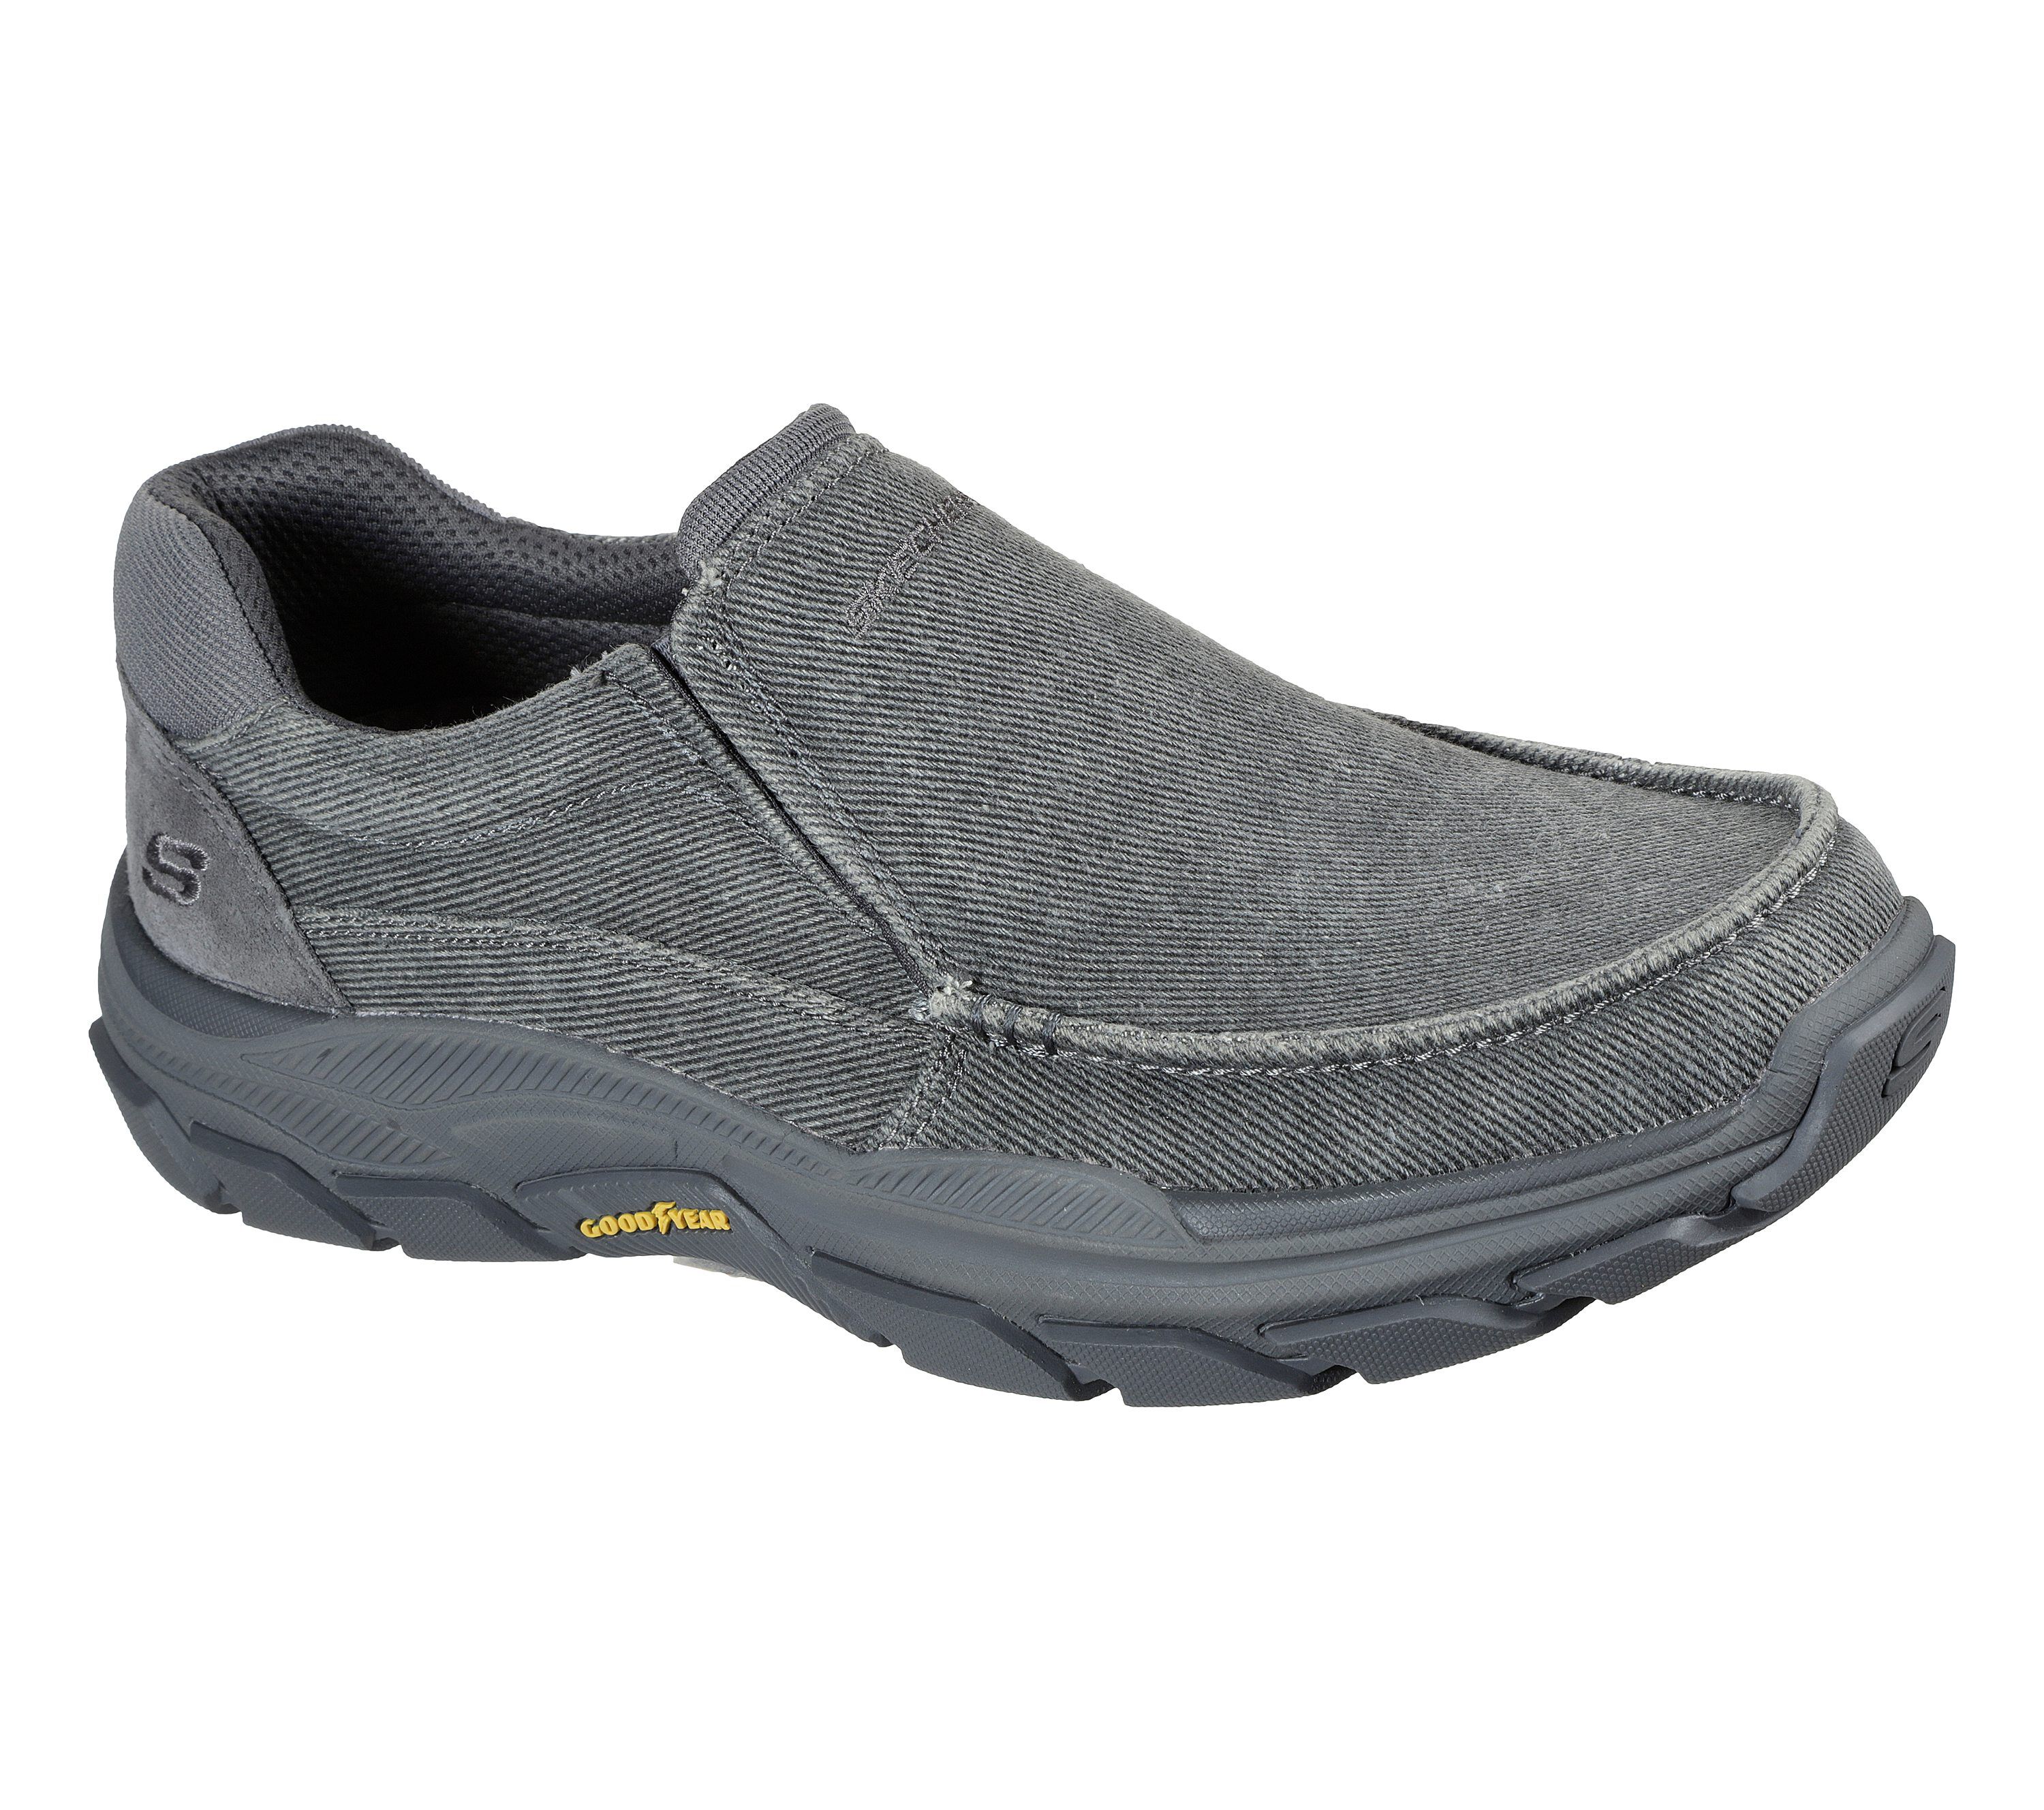 Shop the Relaxed Fit: Respected - Vergo | SKECHERS